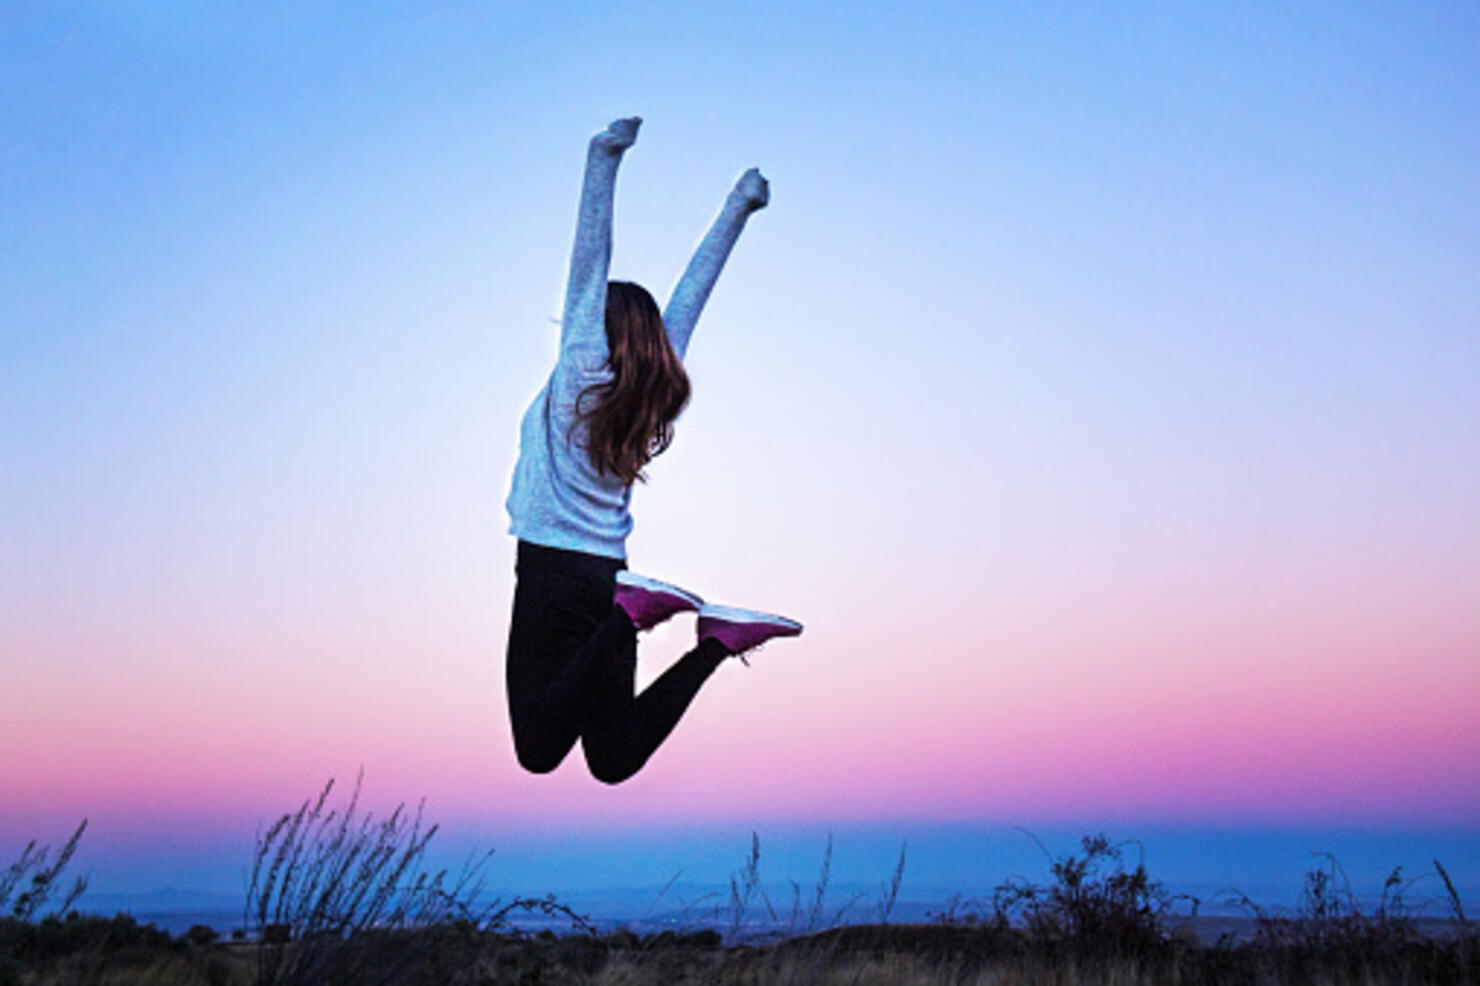 Young woman jumping raising her arms at a colorful sunset - Aragon, Spain